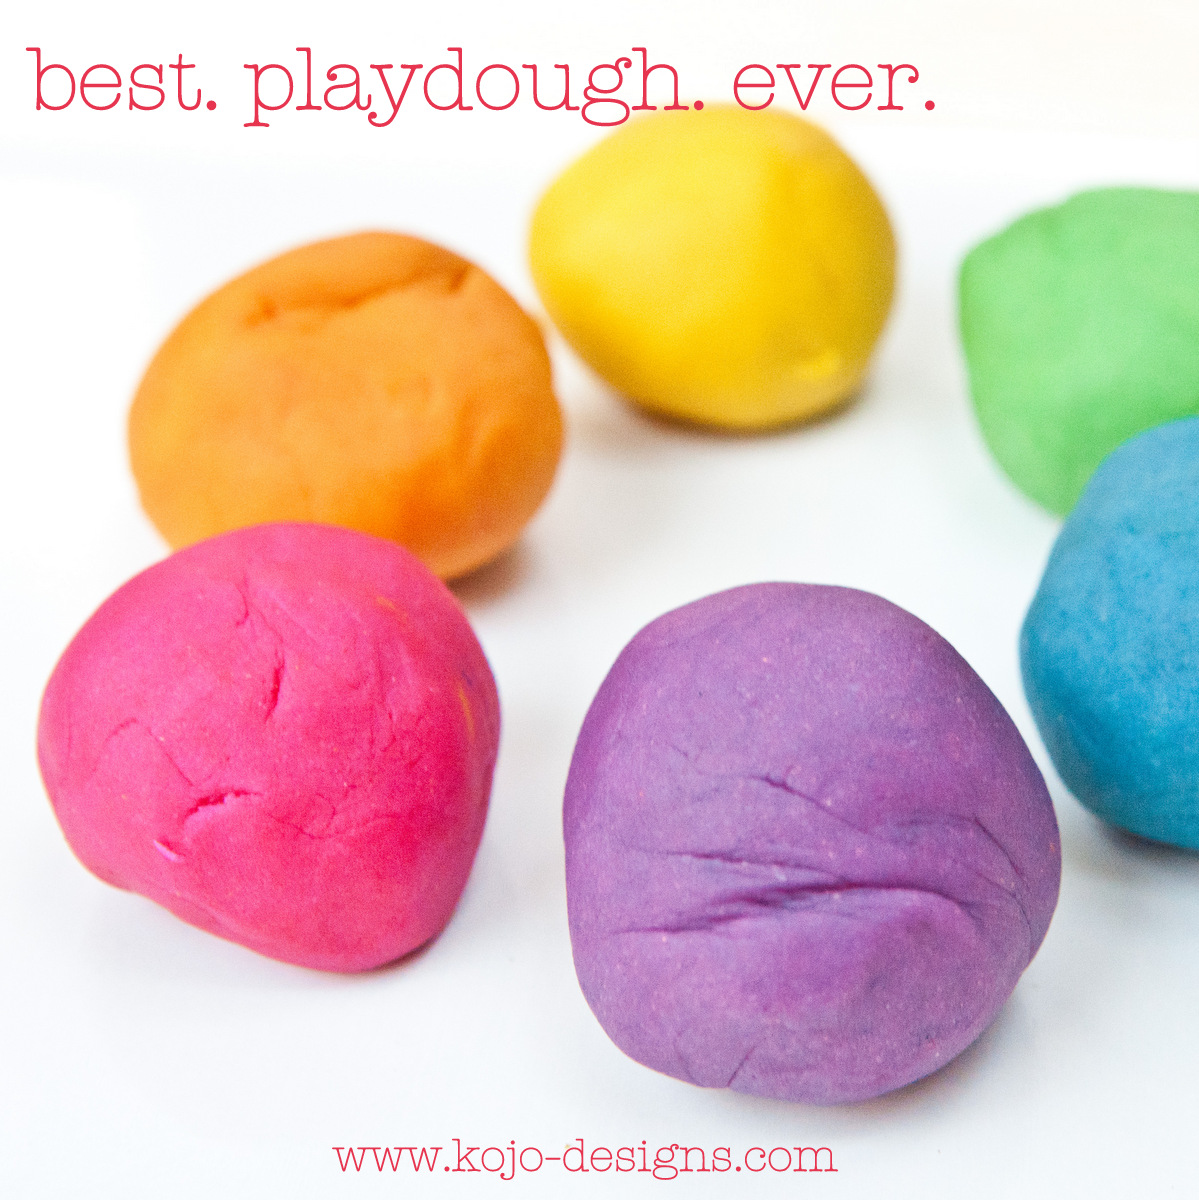 35+ Fun Activities for Kids to Do This Summer --> Make Colorful Playdough